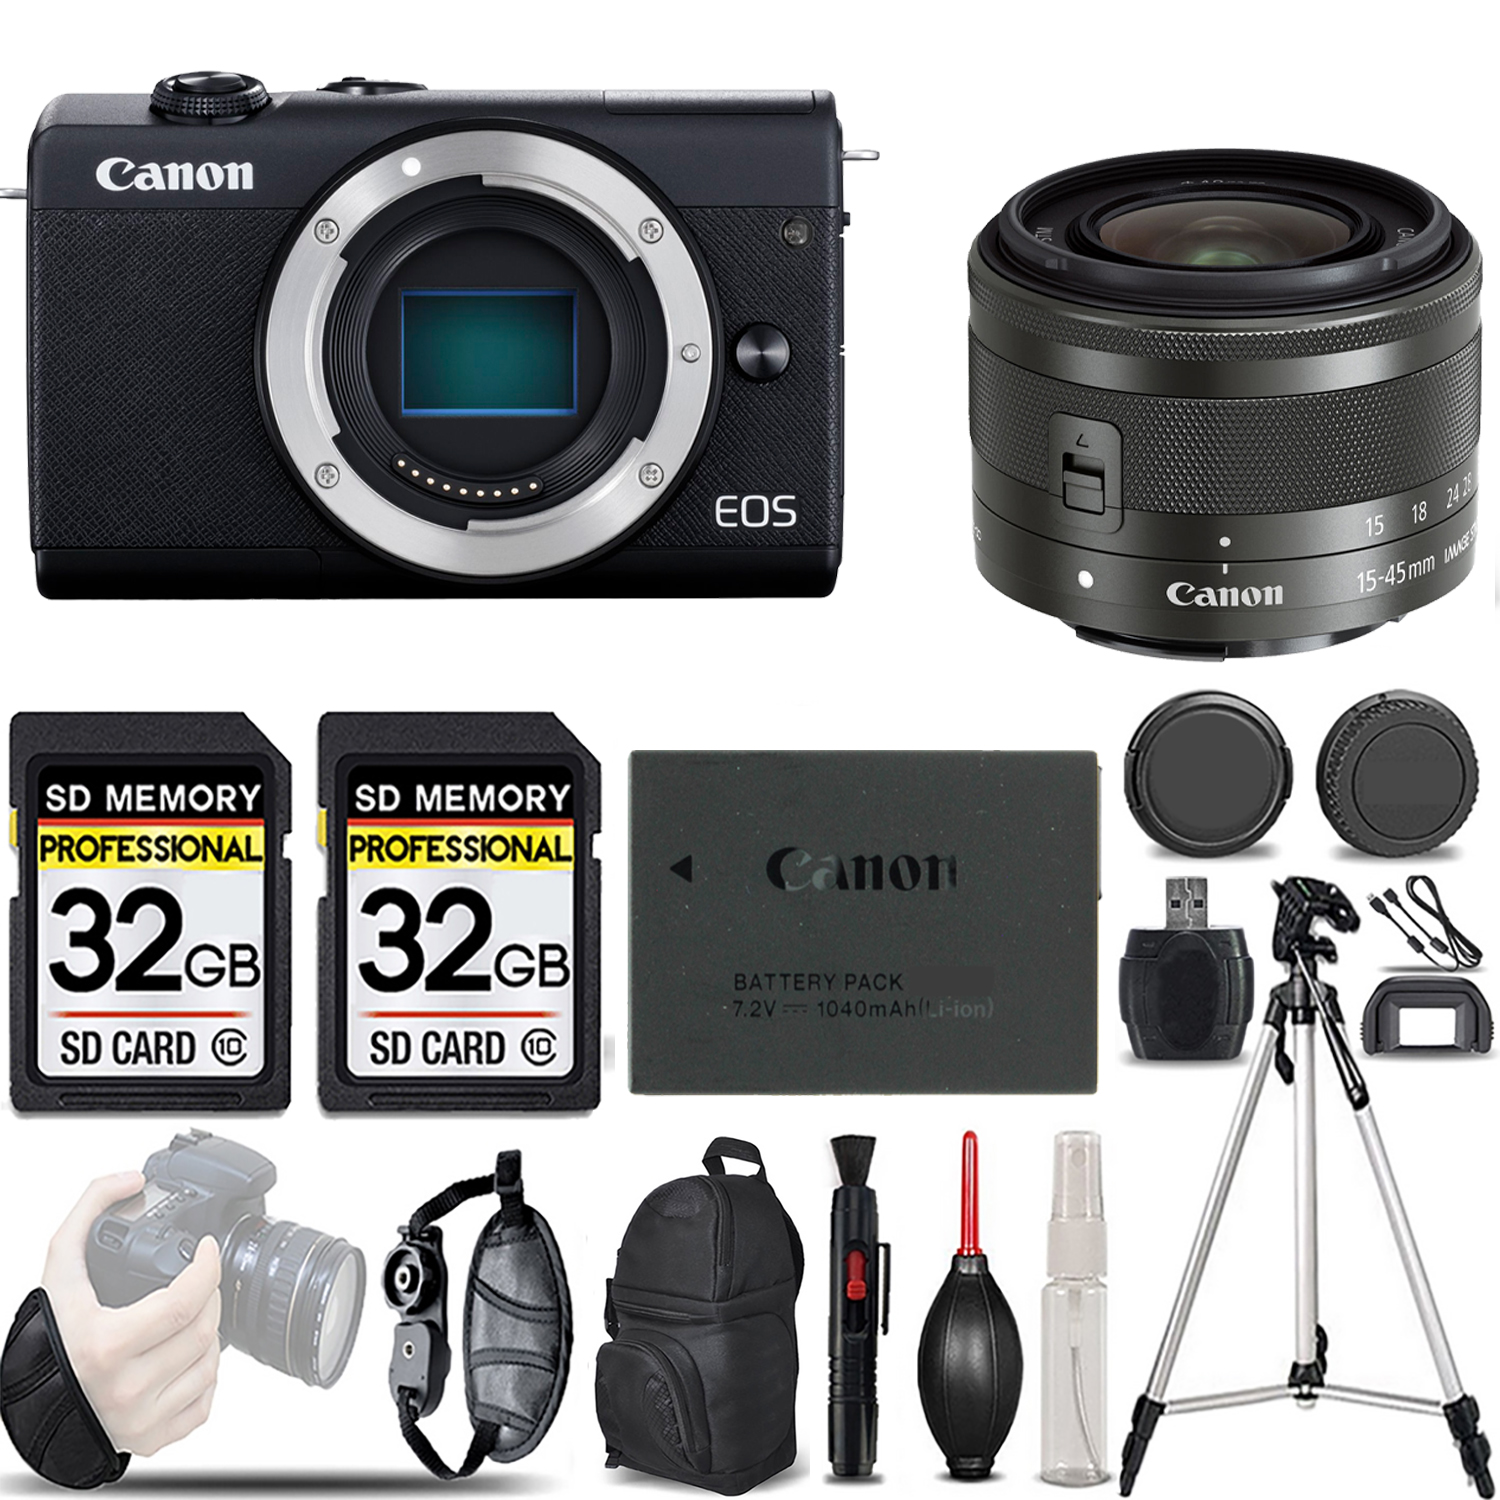 EOS M200  Camera (Black) + 15-45mm IS STM Lens (Graphite) - LOADED KIT *FREE SHIPPING*